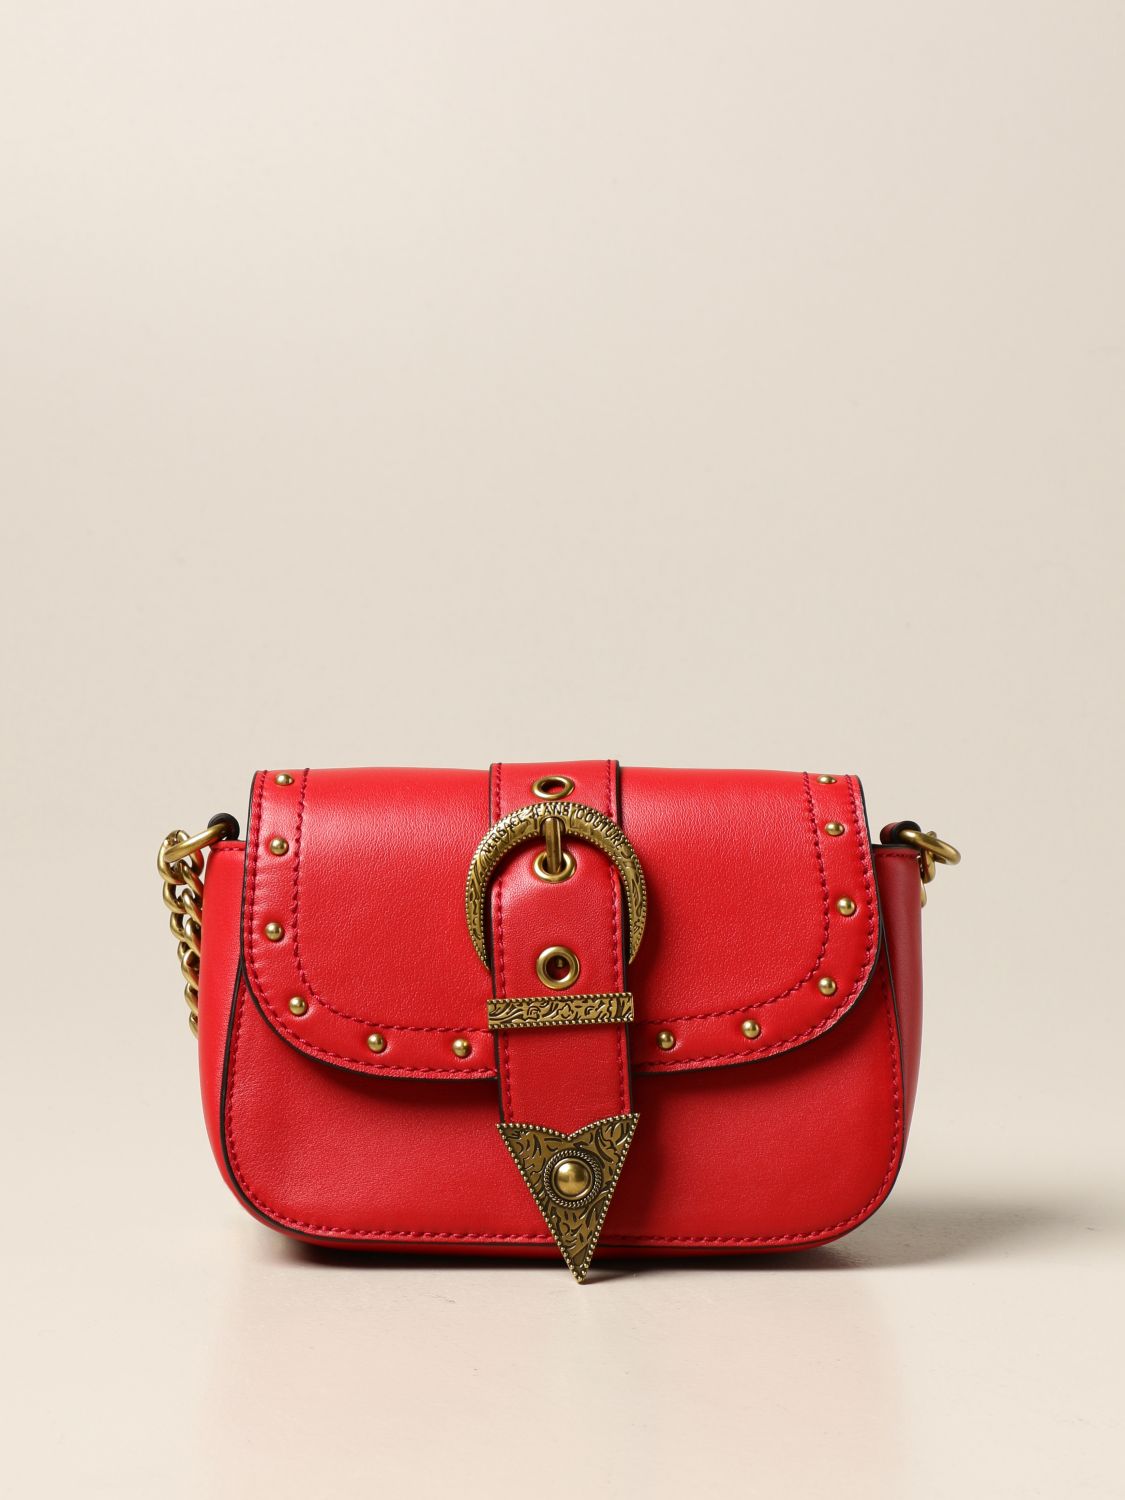 VERSACE JEANS COUTURE: Rodeo leather bag - Red | Shoulder Bag Versace ...